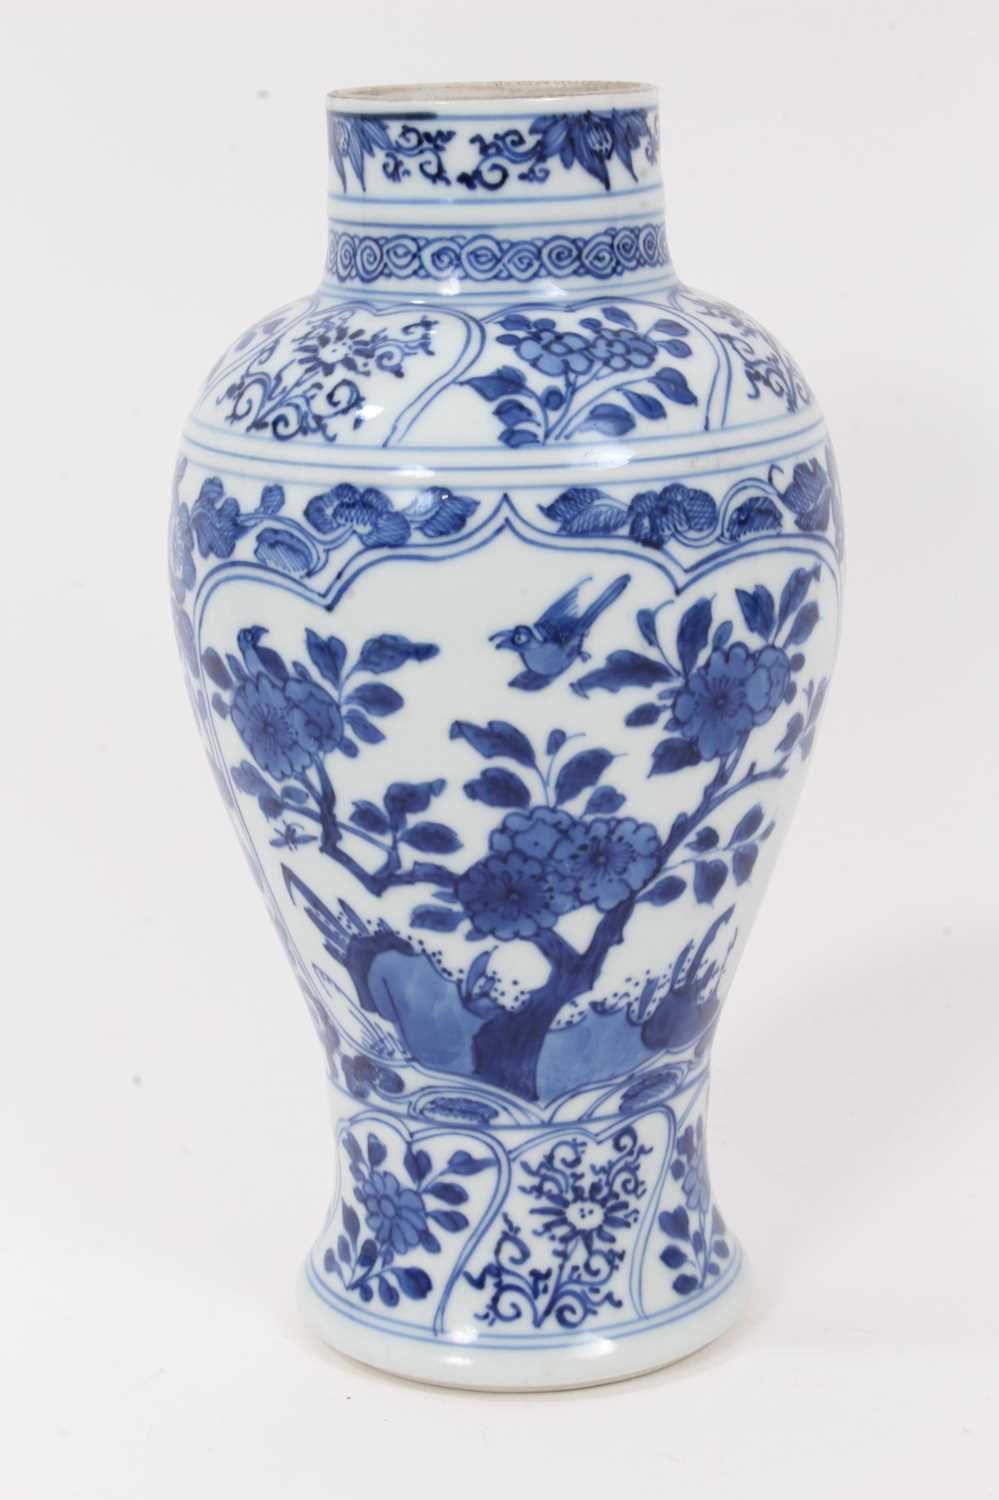 Lot 137 - 18th/19th century Chinese porcelain baluster form vase with painted underglaze blue floral panels